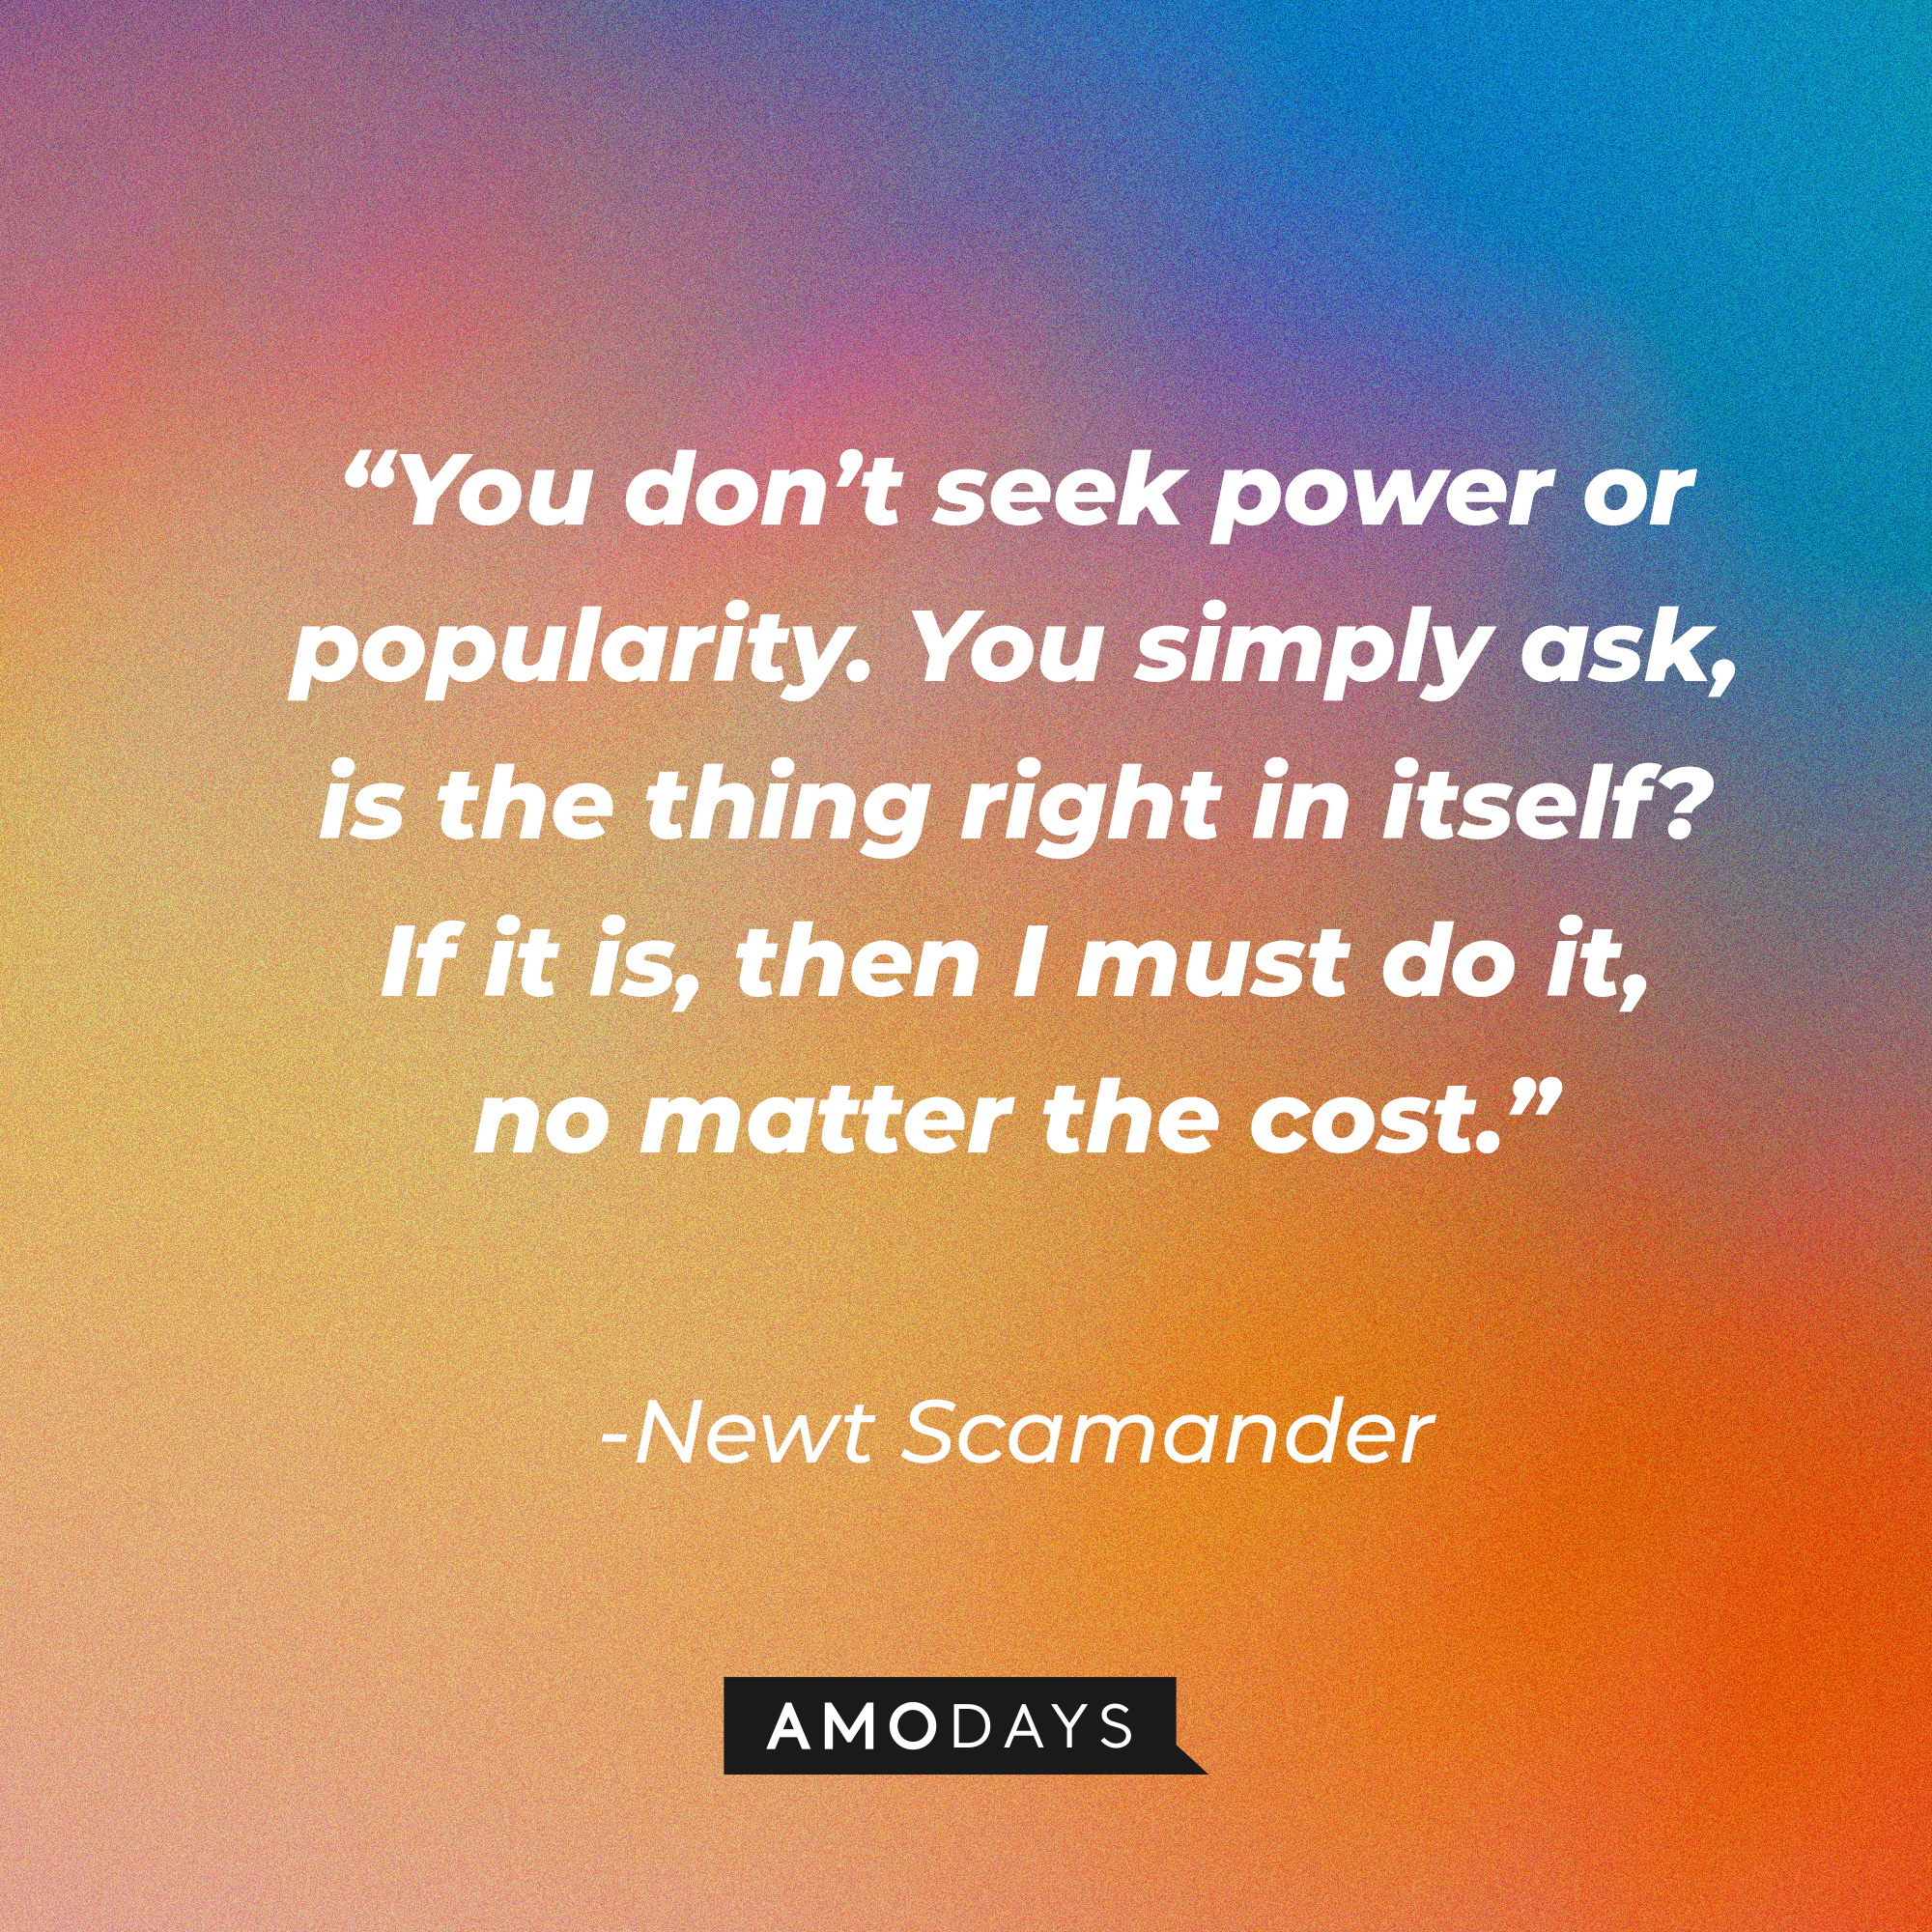 Newt Scamander's quote: "You don't seek power of popularity. You simply ask is the thing right in itself? If it is, then I must do it, no matter the cost." | Source: facebook.com/fantasticbeastsmovie